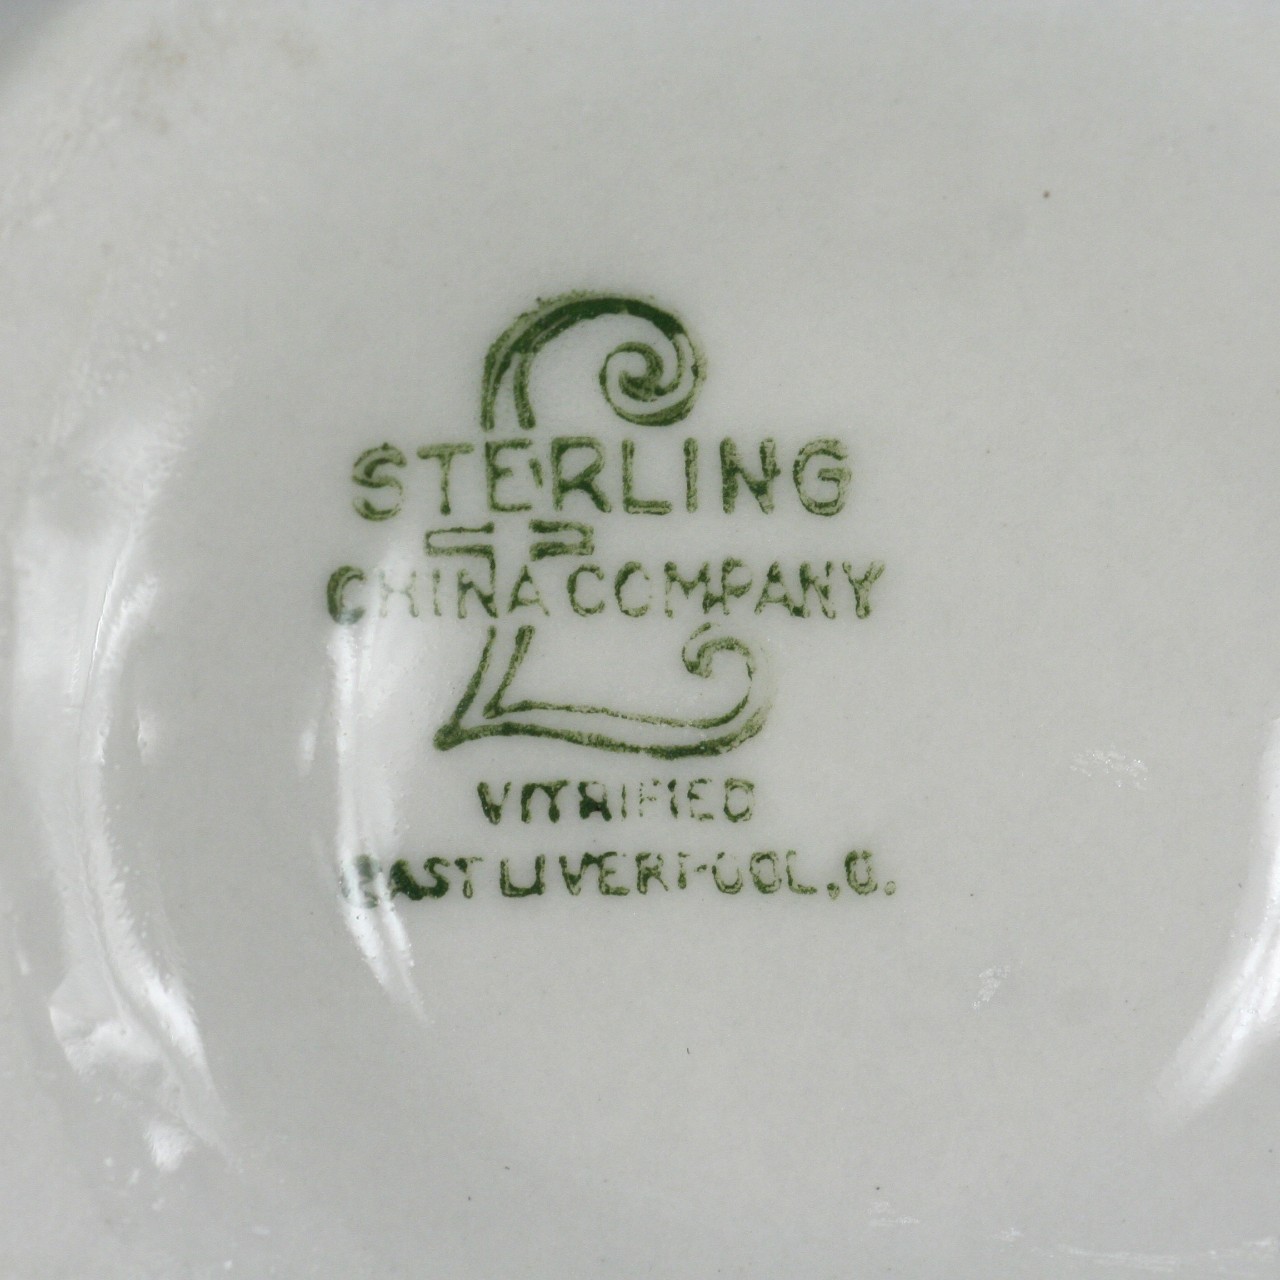 <p>A close up of the maker’s mark located on the base of a white cup. It has a large L with “Sterling China Company” across the L. Below the large L is the words “Vitrified East Liverpool”.</p>
